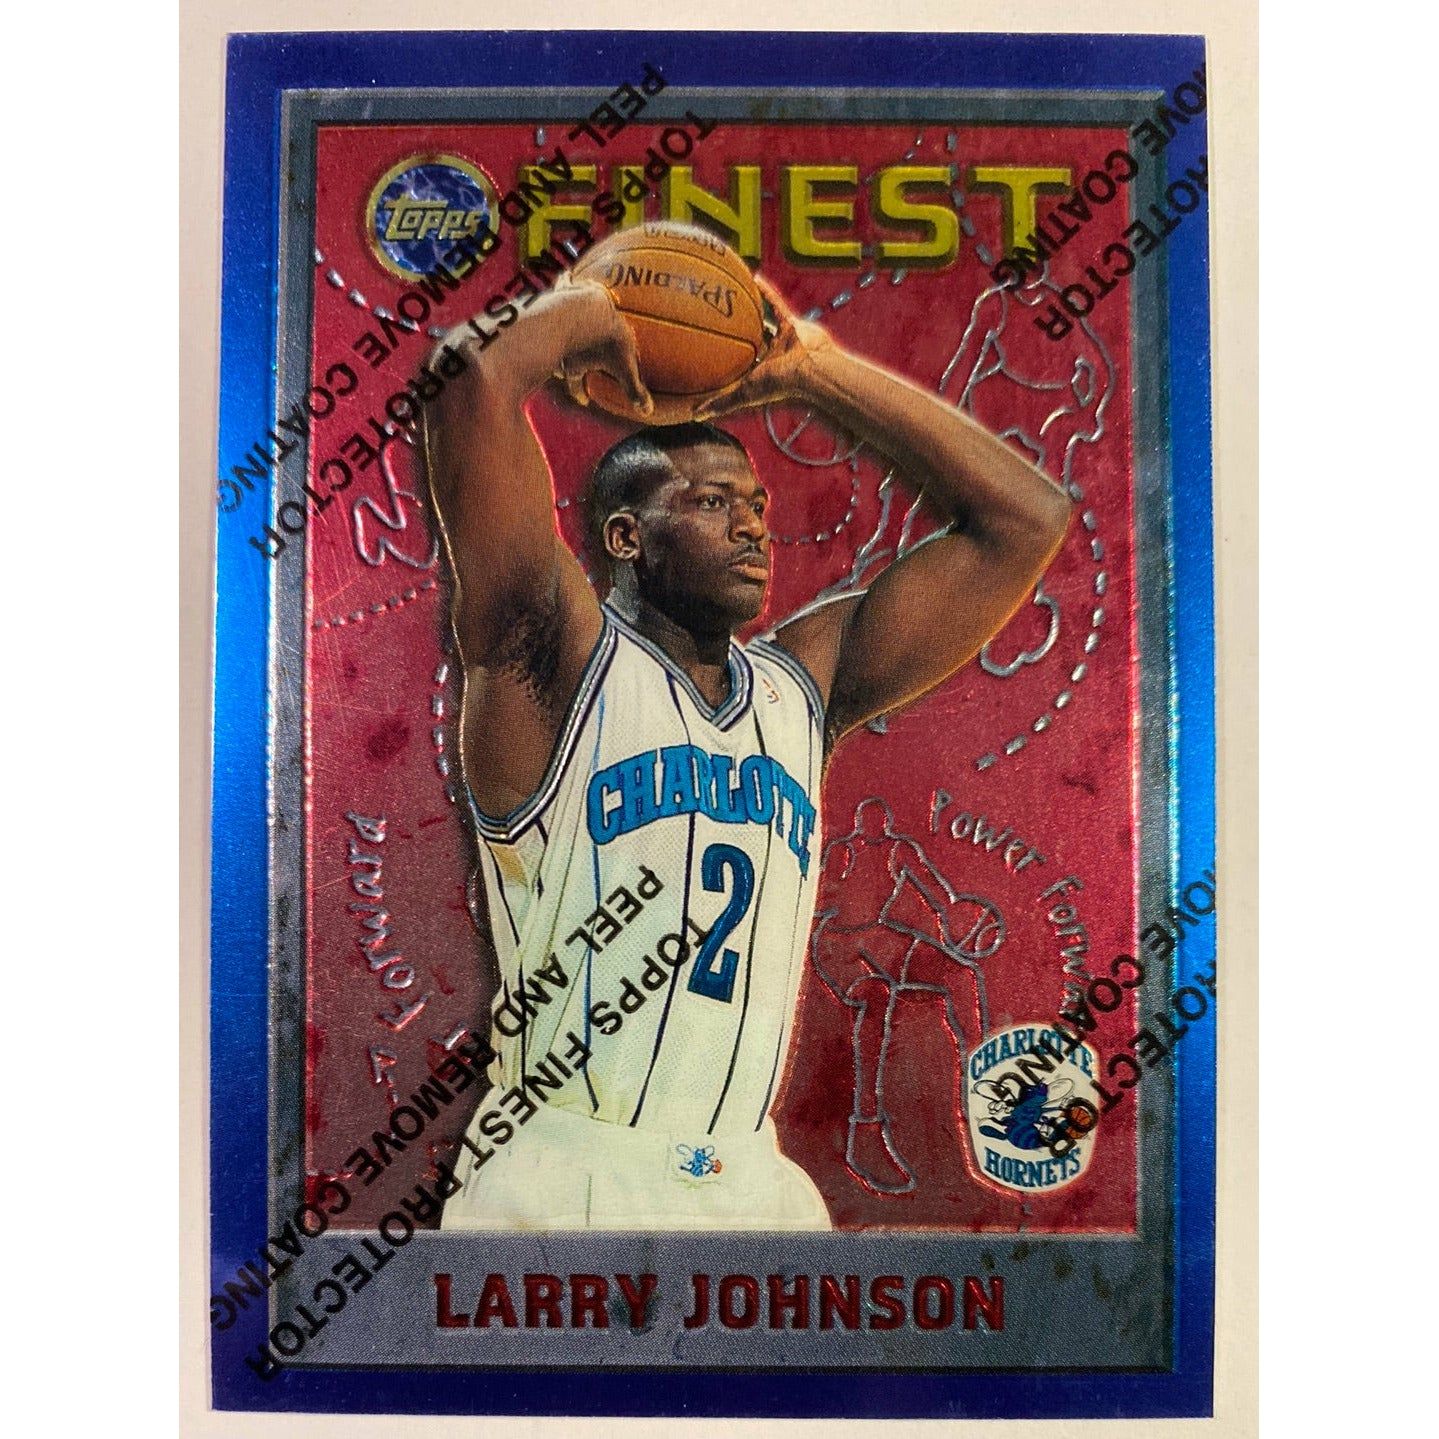  1995-96 Topps Finest Larry Johnson Blue Skin Protecter Unpeeled  Local Legends Cards & Collectibles